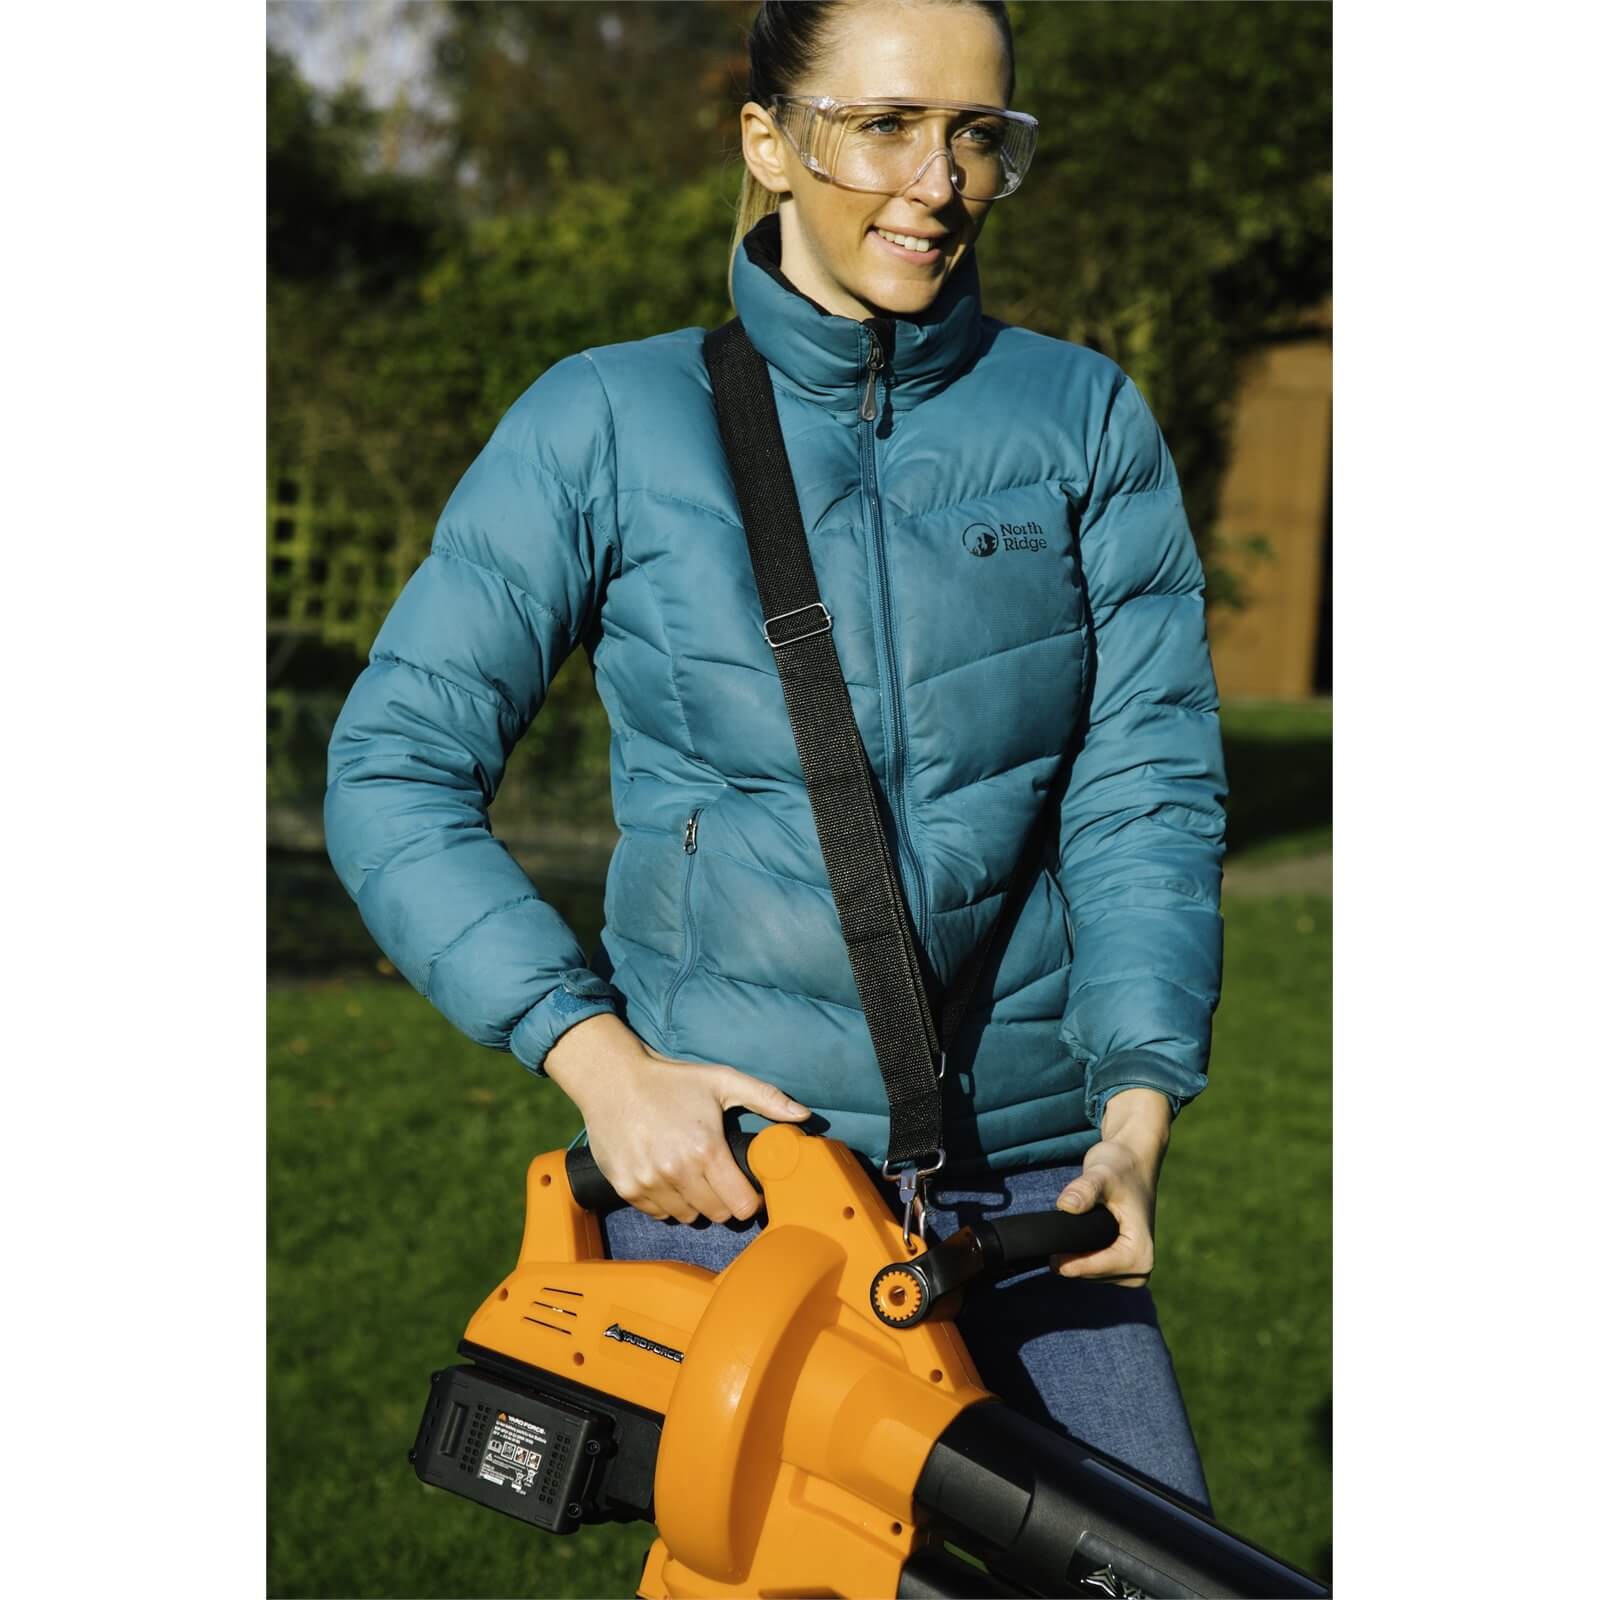 Yard Force 40V Cordless 3-in-1 Blower Vacuum